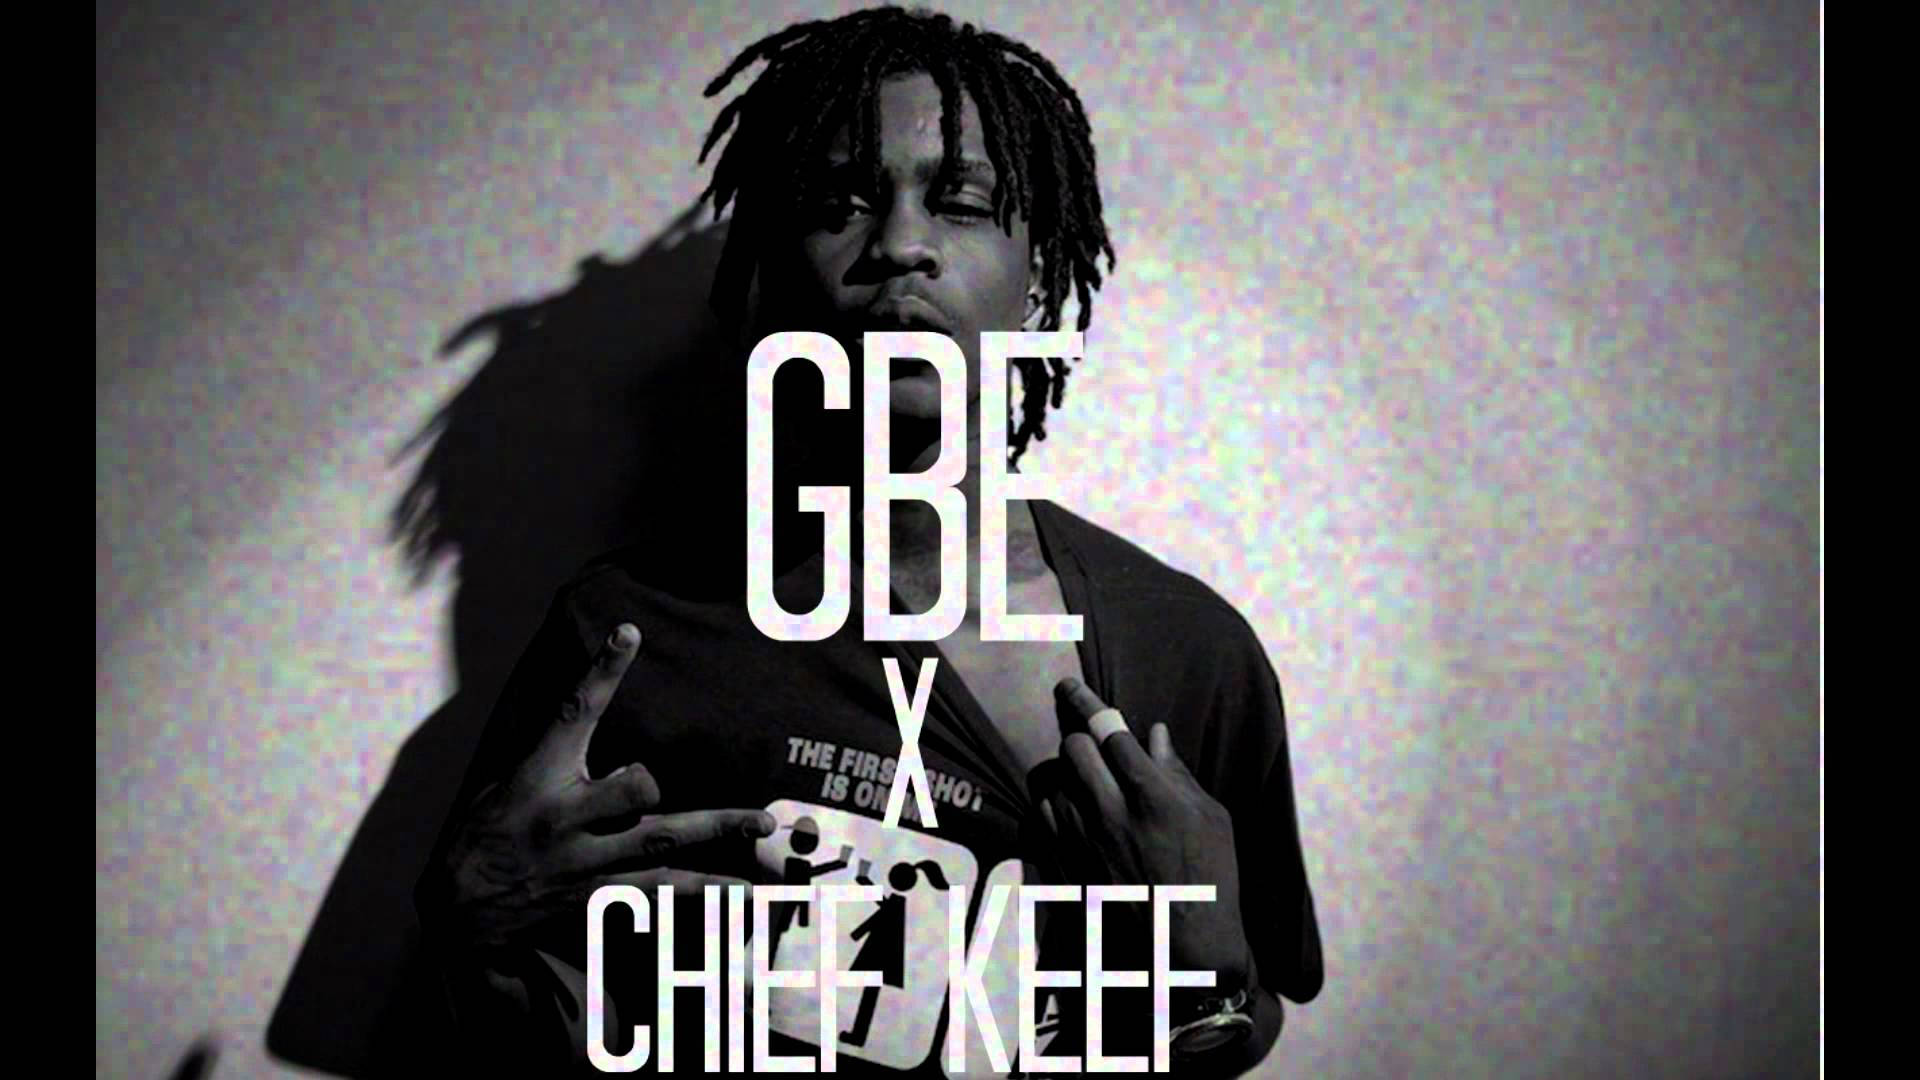 Chief Keef X Gbe Monochrome Poster Background